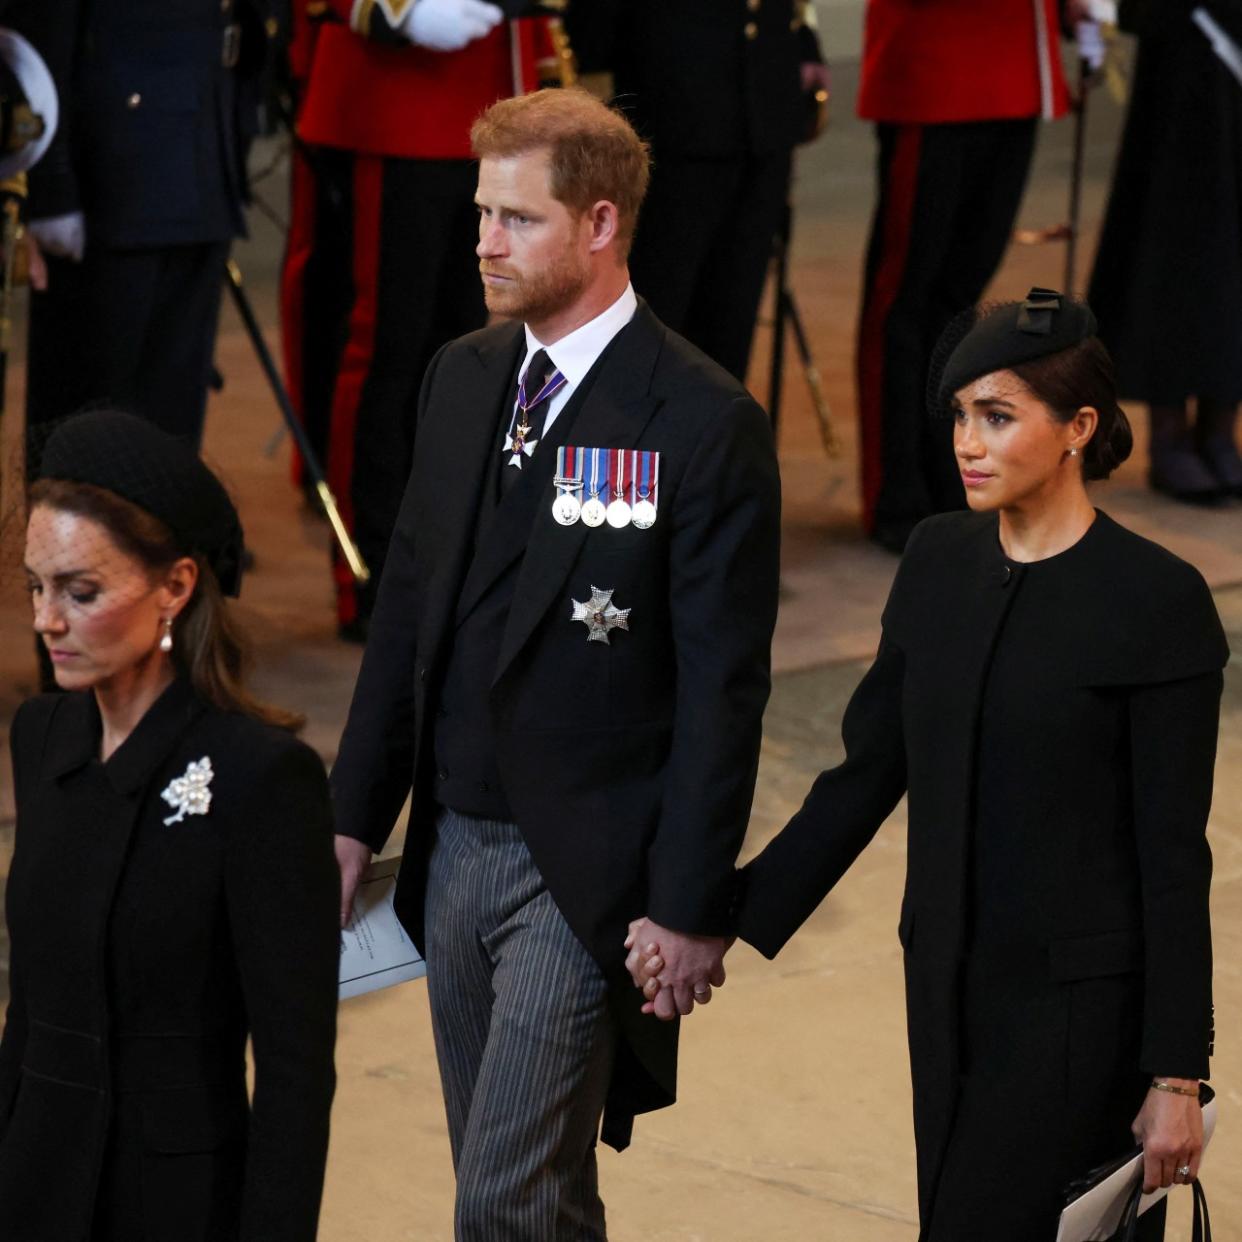  Catherine, Princess of Wales, Prince Harry, Duke of Sussex and Meghan, Duchess of Sussex and Peter Phillips arrive in the Palace of Westminster after the procession for the Lying-in State of Queen Elizabeth II on September 14, 2022 in London, England. Queen Elizabeth II's coffin is taken in procession on a Gun Carriage of The King's Troop Royal Horse Artillery from Buckingham Palace to Westminster Hall where she will lay in state until the early morning of her funeral. Queen Elizabeth II died at Balmoral Castle in Scotland on September 8, 2022, and is succeeded by her eldest son, King Charles III. 